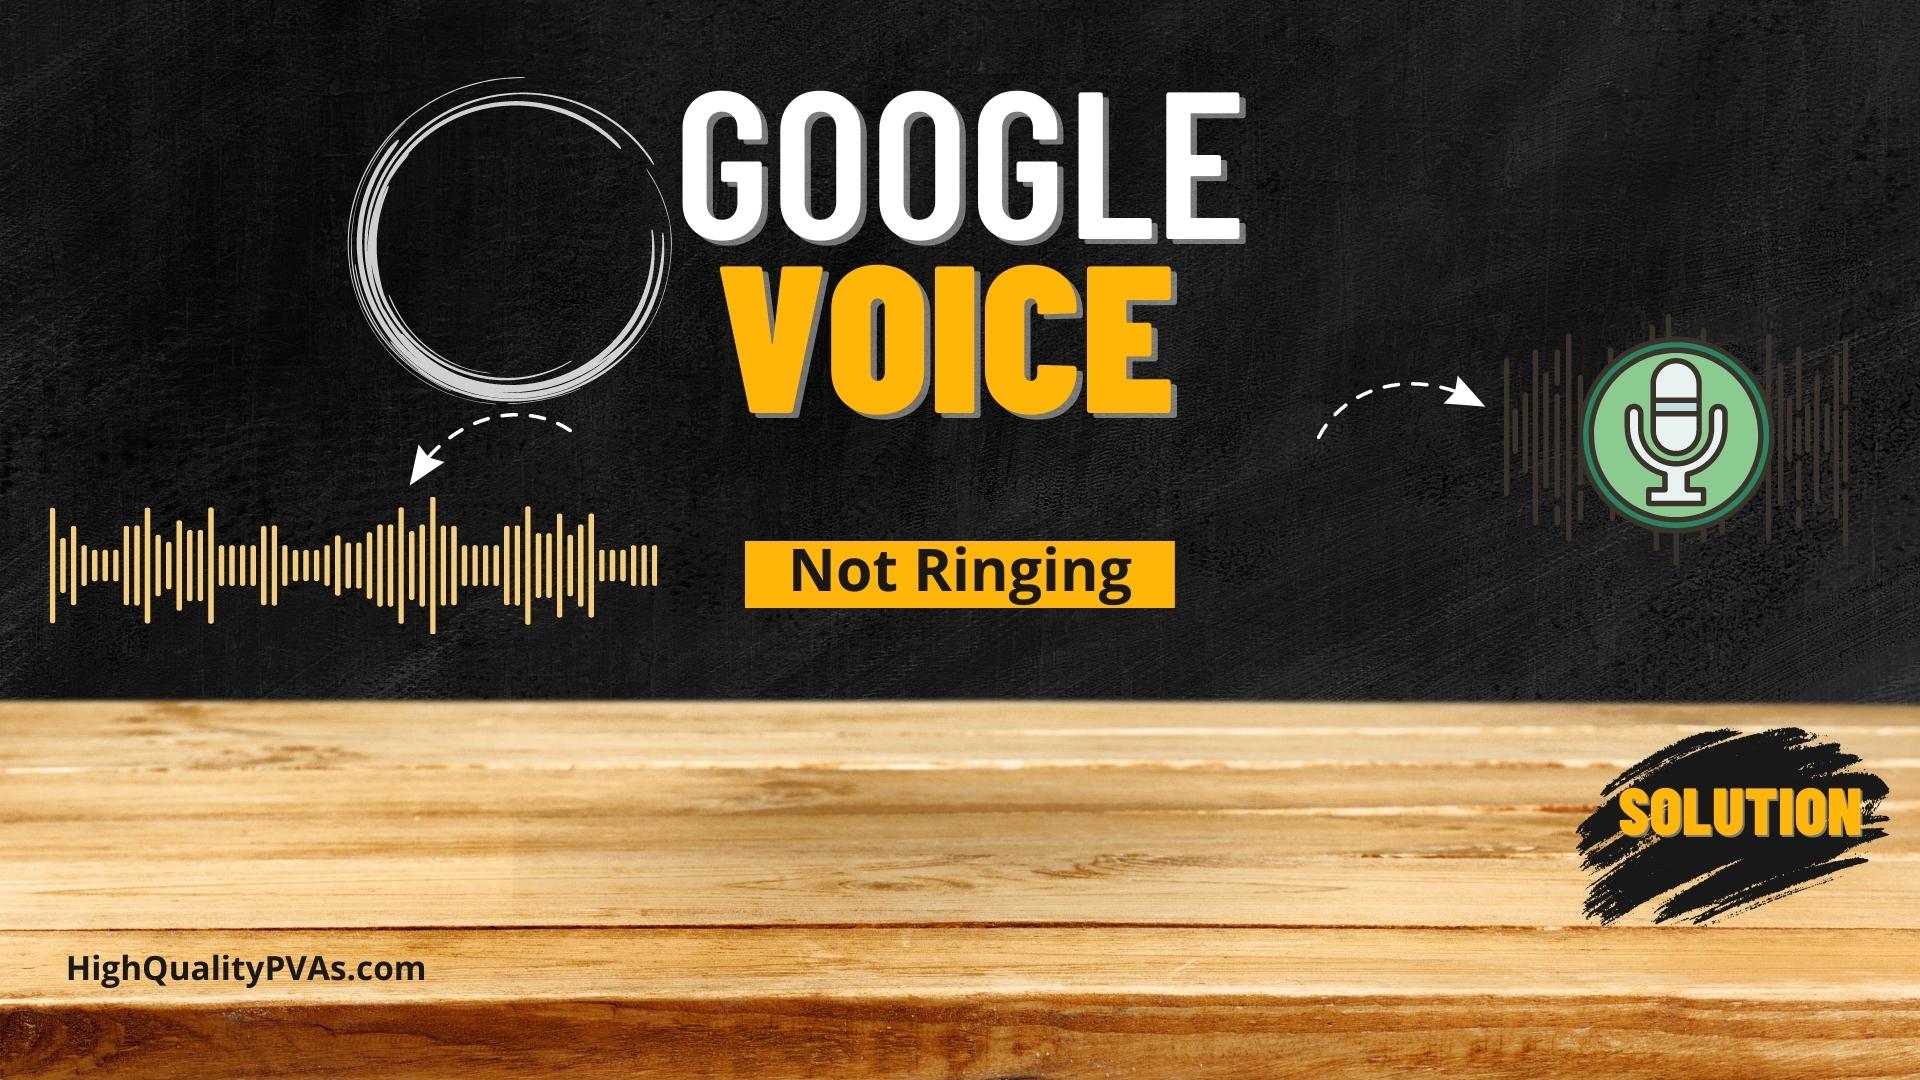 How to Fix Google Voice Not Ringing Problem?